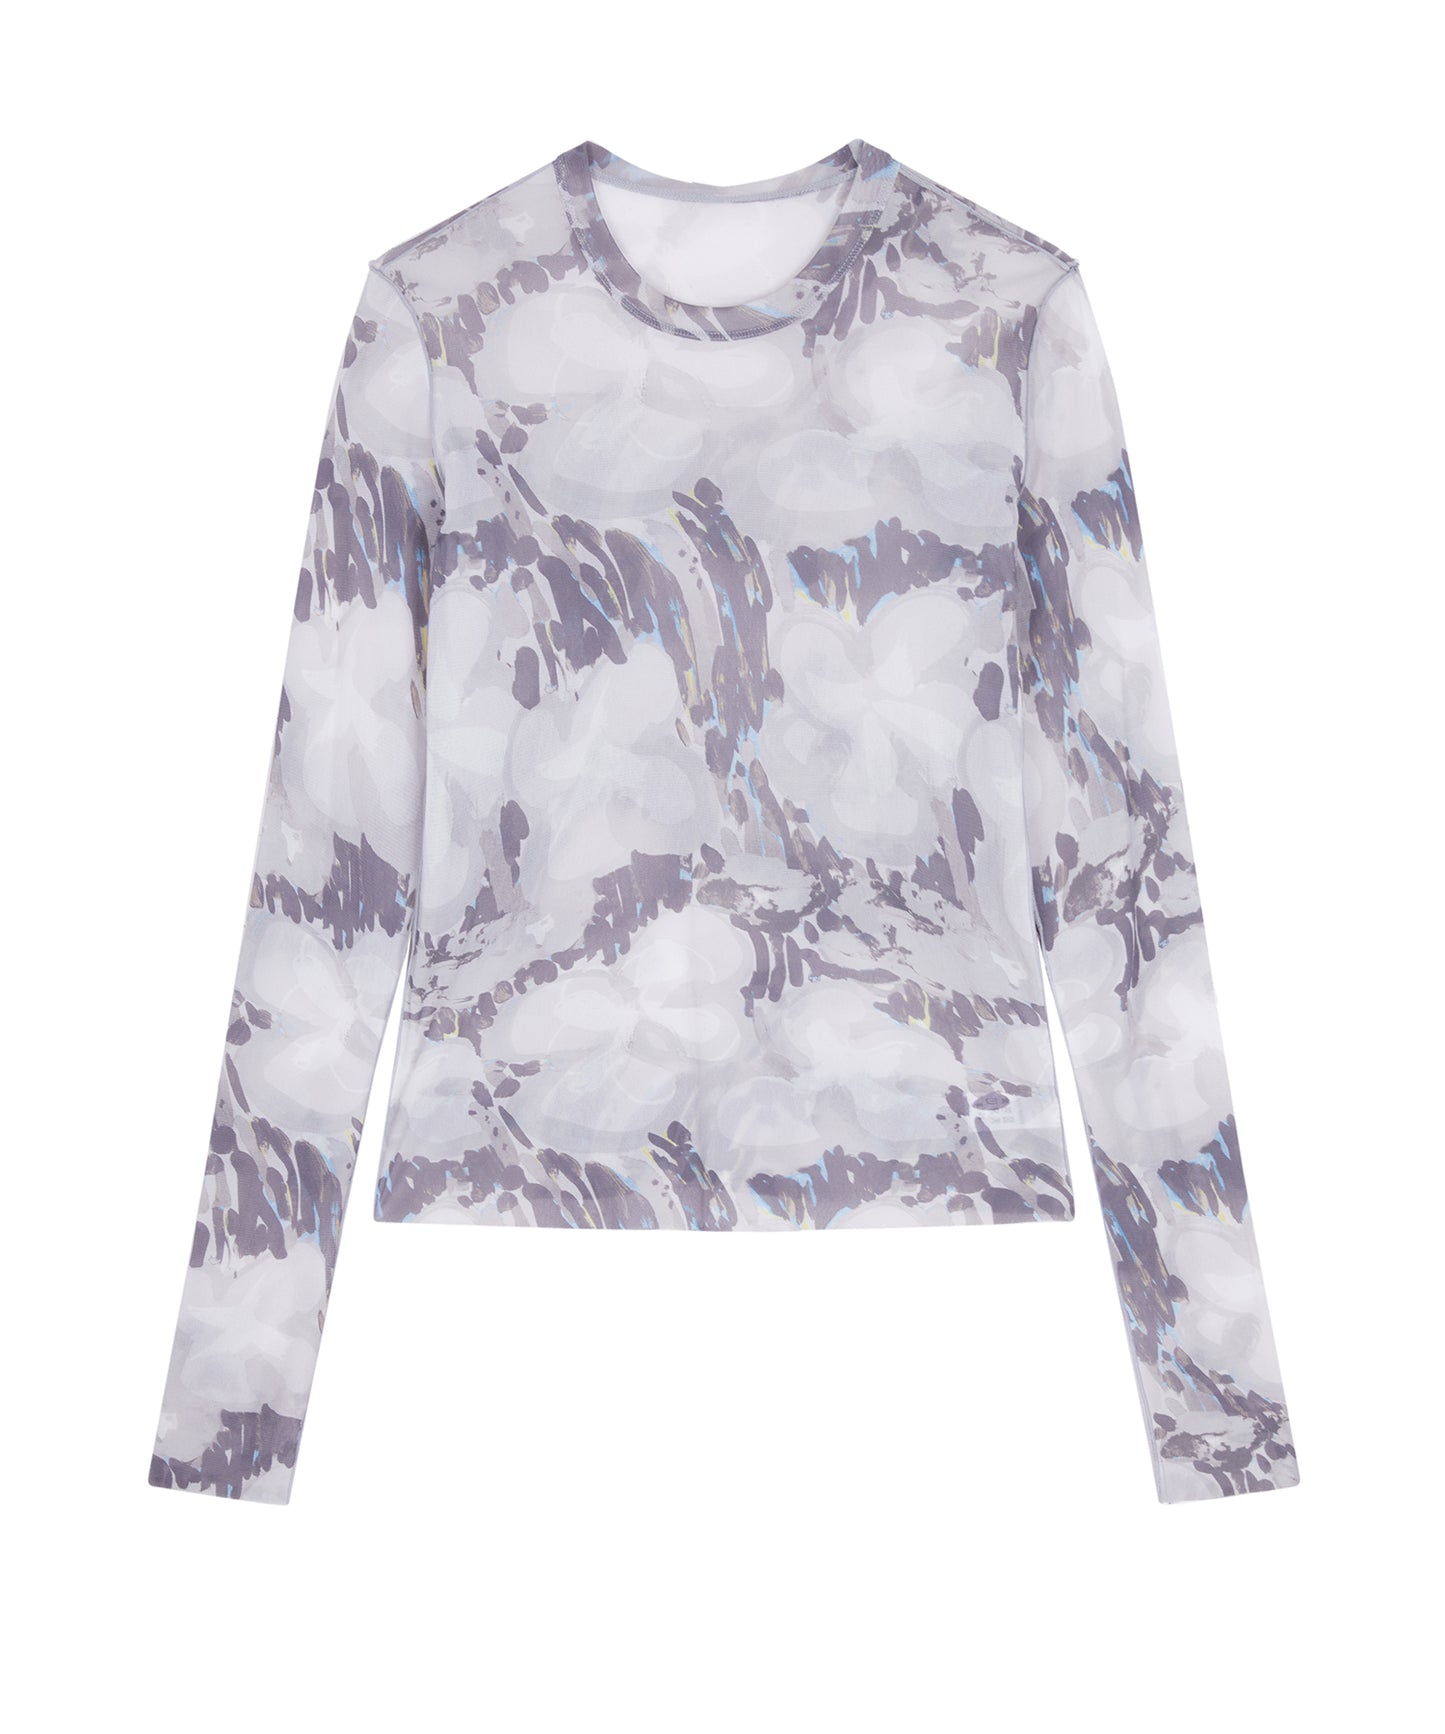 Abstract Graffiti Floral Second Skin Top